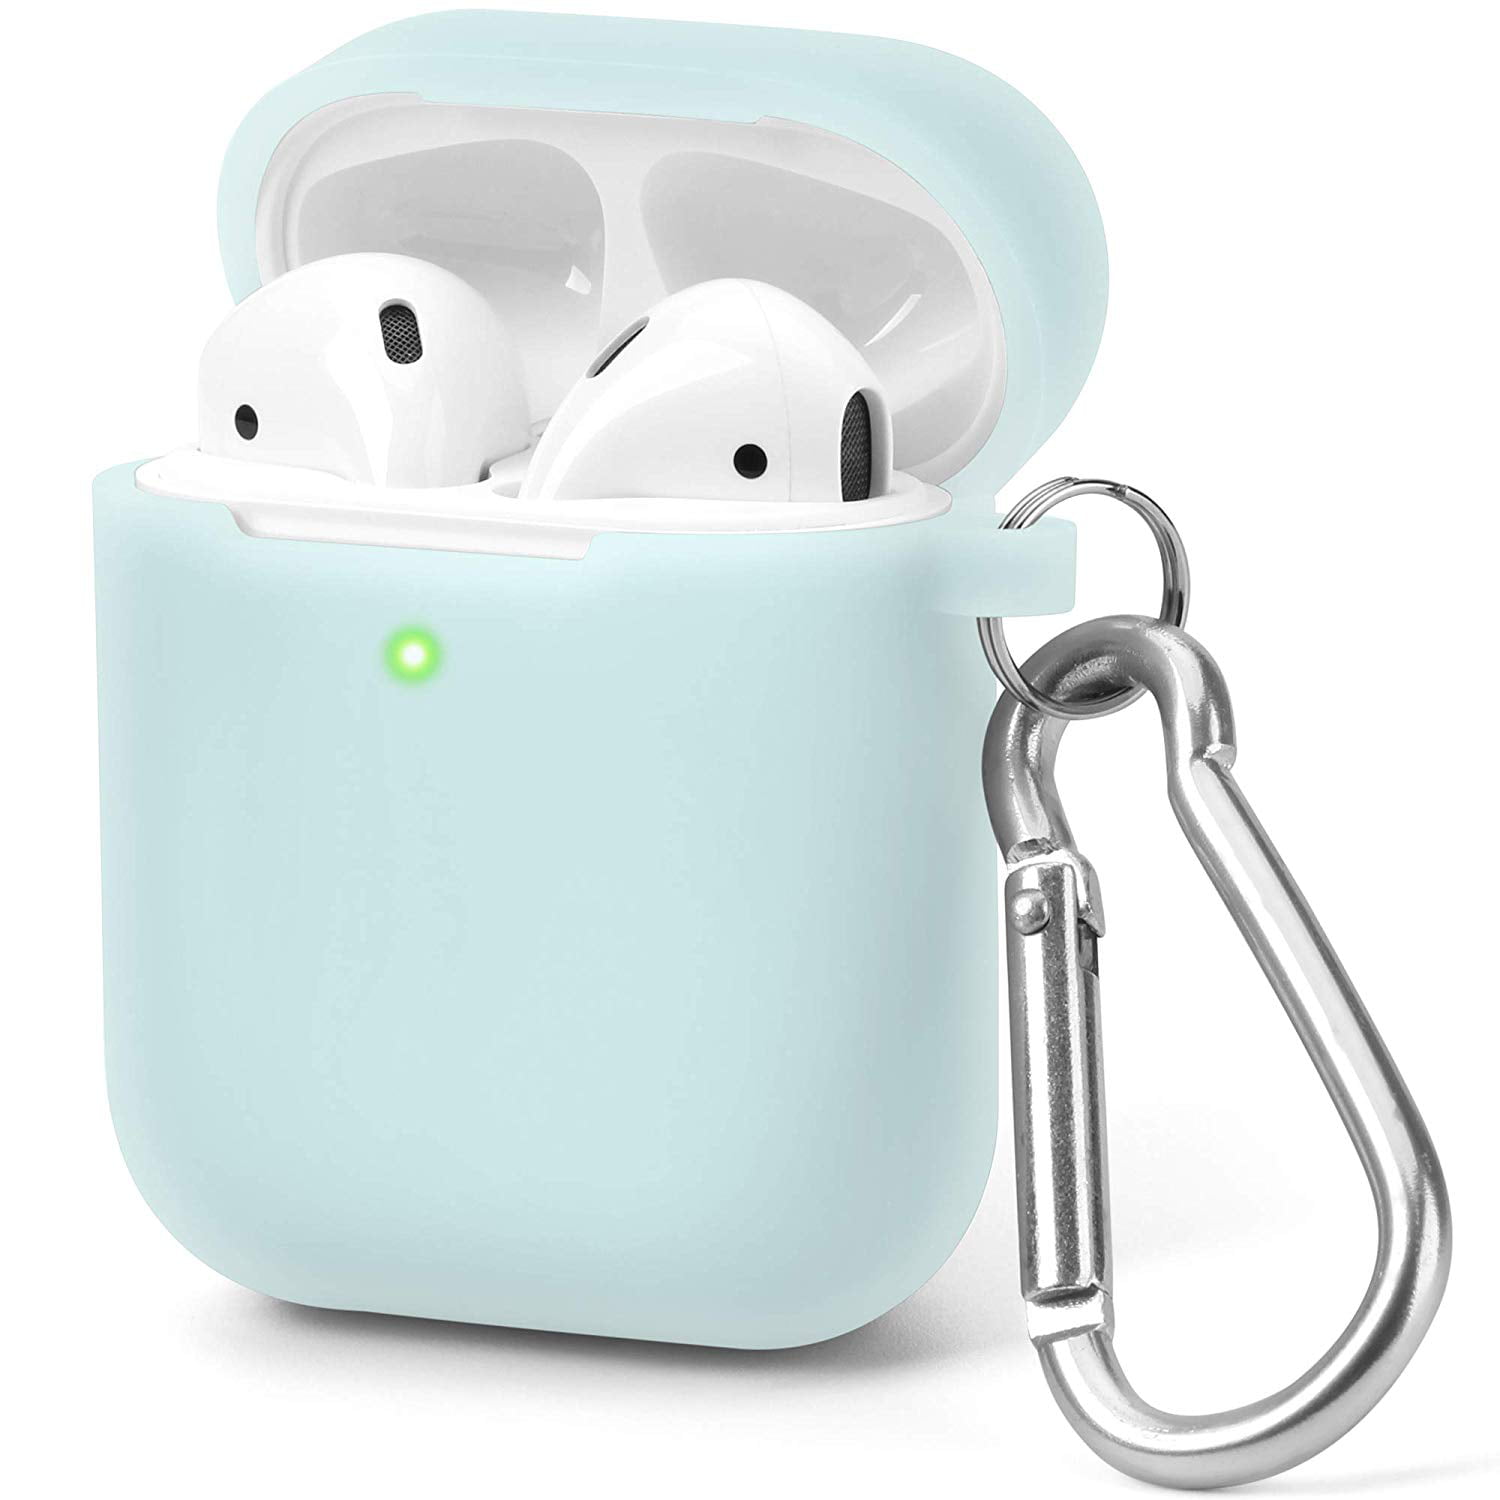 Silicone Skin Cover for Apple AirPods Wireless Charging Case,Front LED Visible Light Grey AirPods Case Cover with Keychain